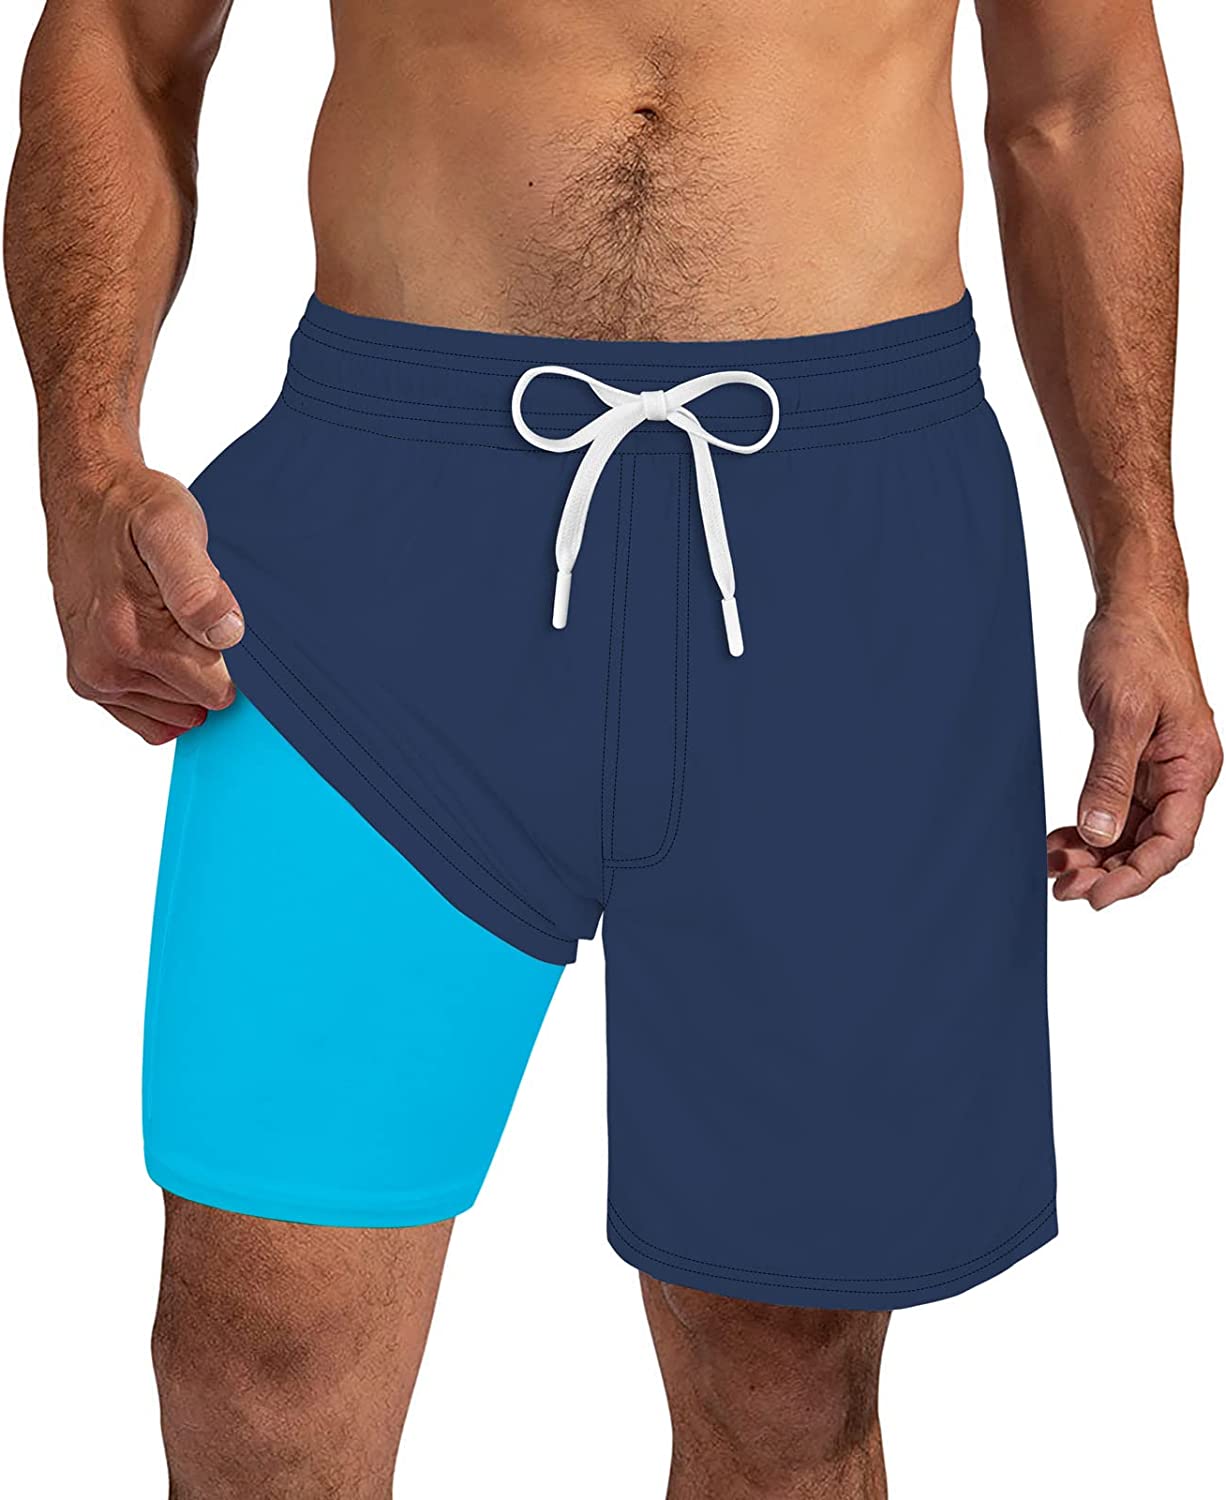 SURF CUZ Mens Swim Trunks with Compression Liner Quick Dry Bathing